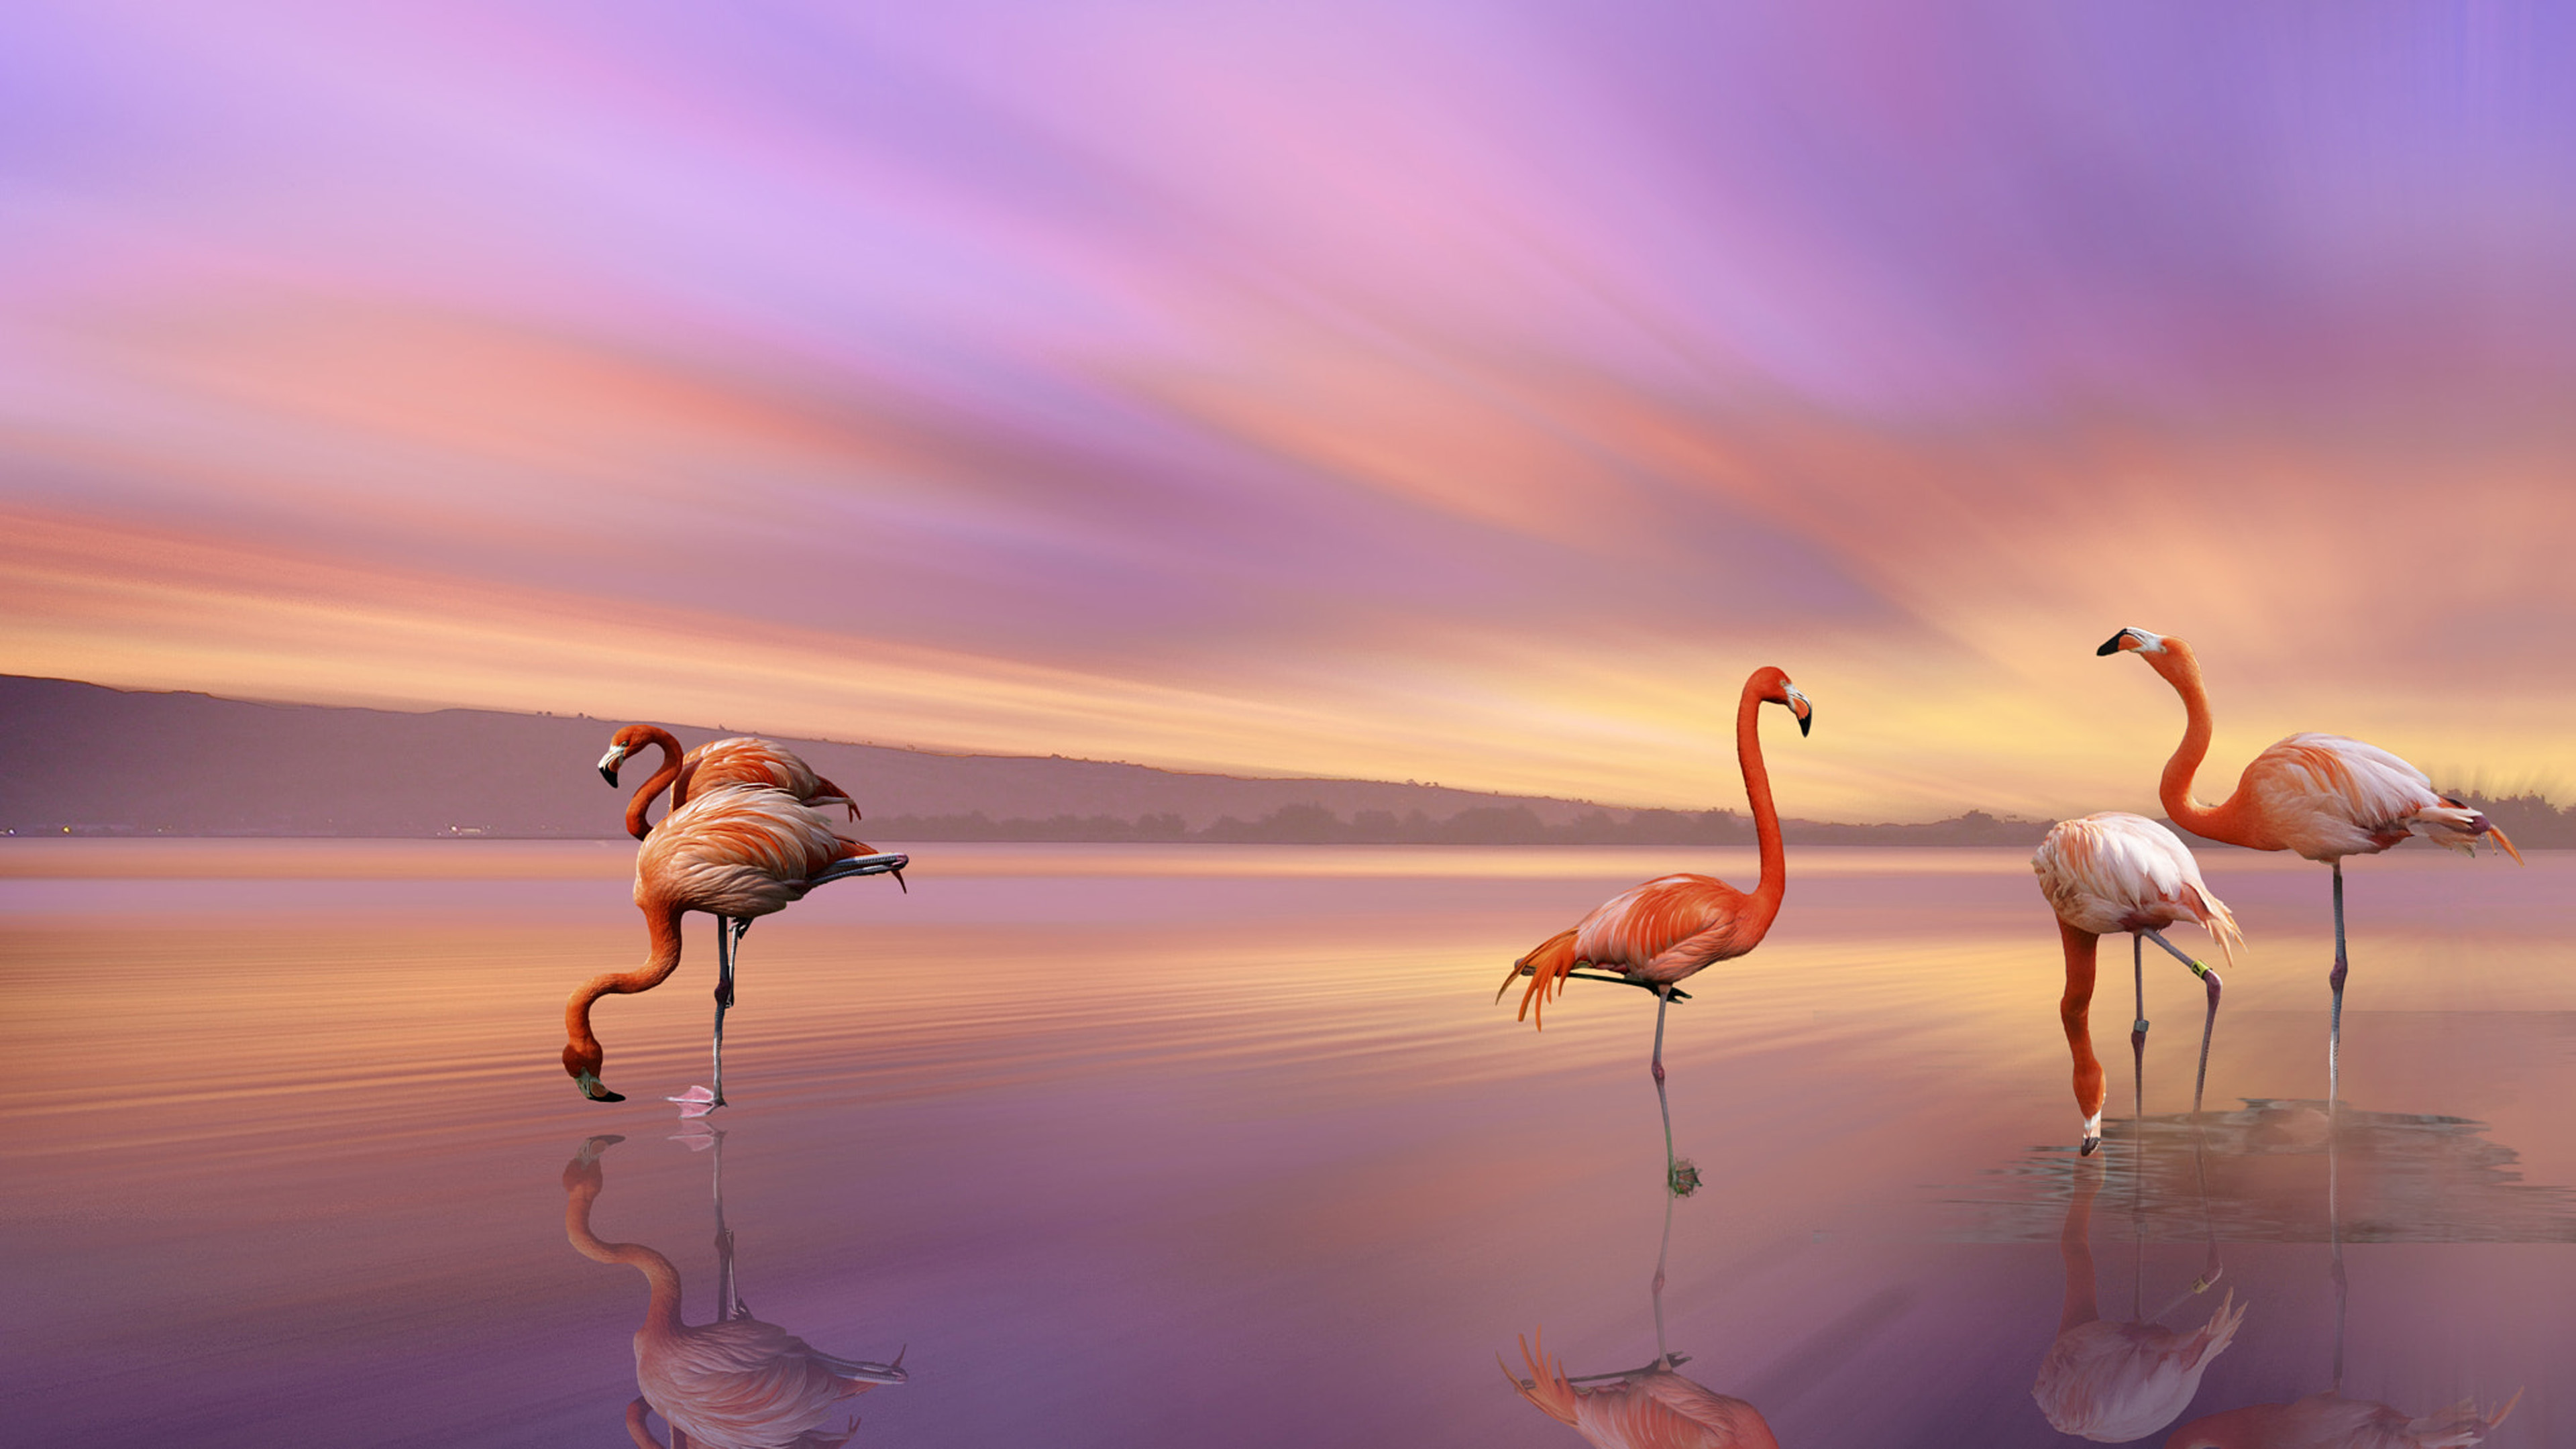 Flamingos on the Beach at Sunset